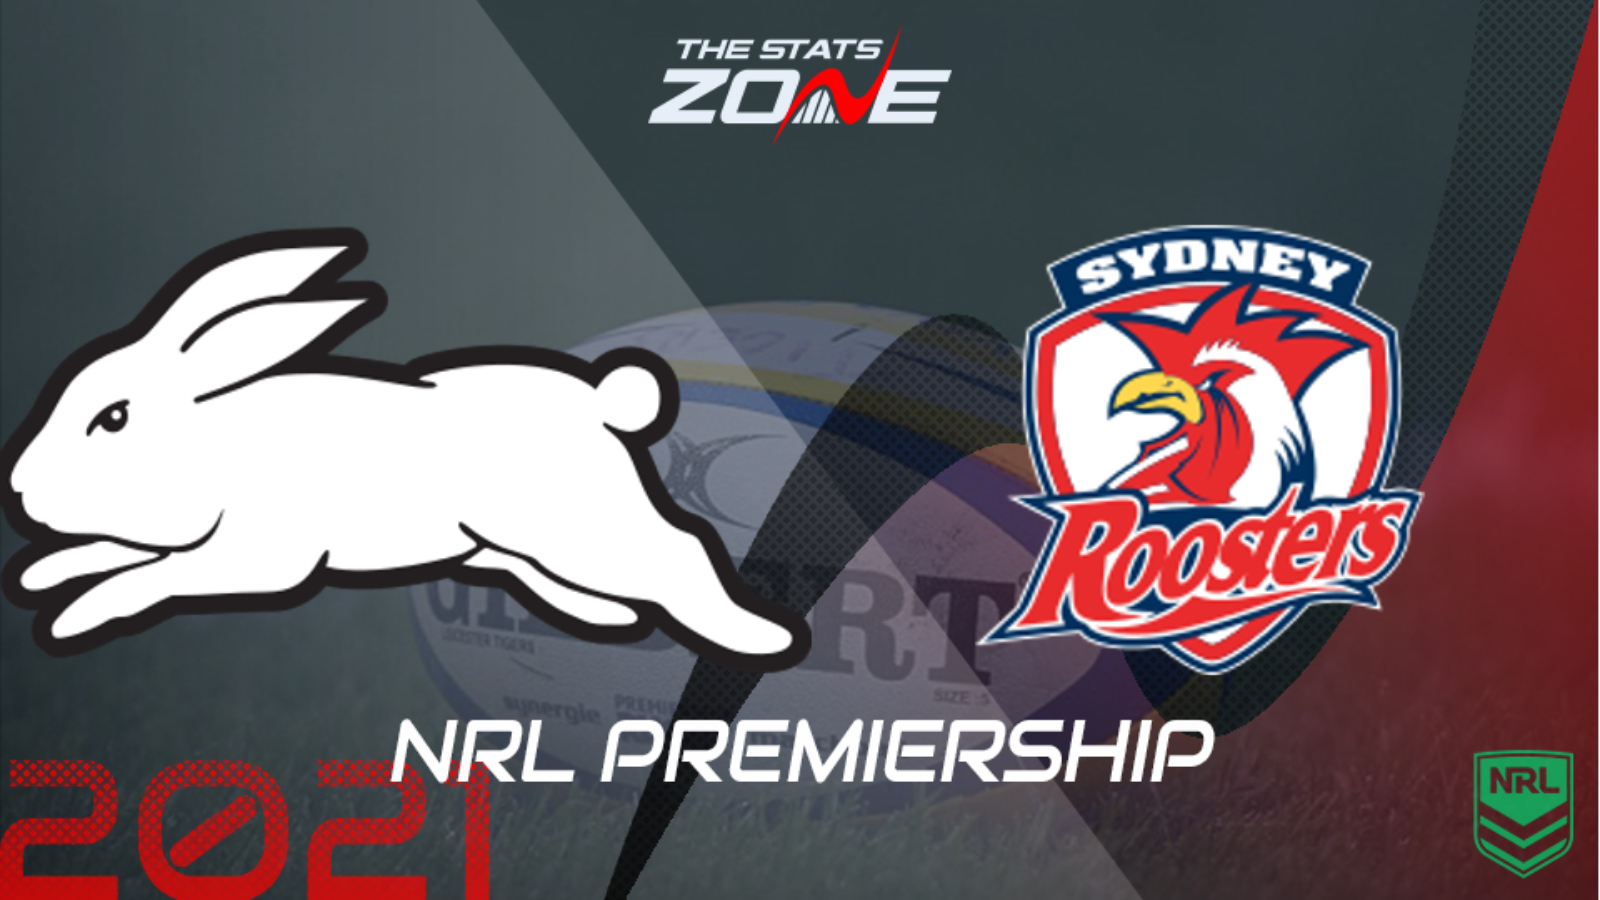 2021 Nrl South Sydney Rabbitohs Vs Sydney Roosters Preview Prediction The Stats Zone